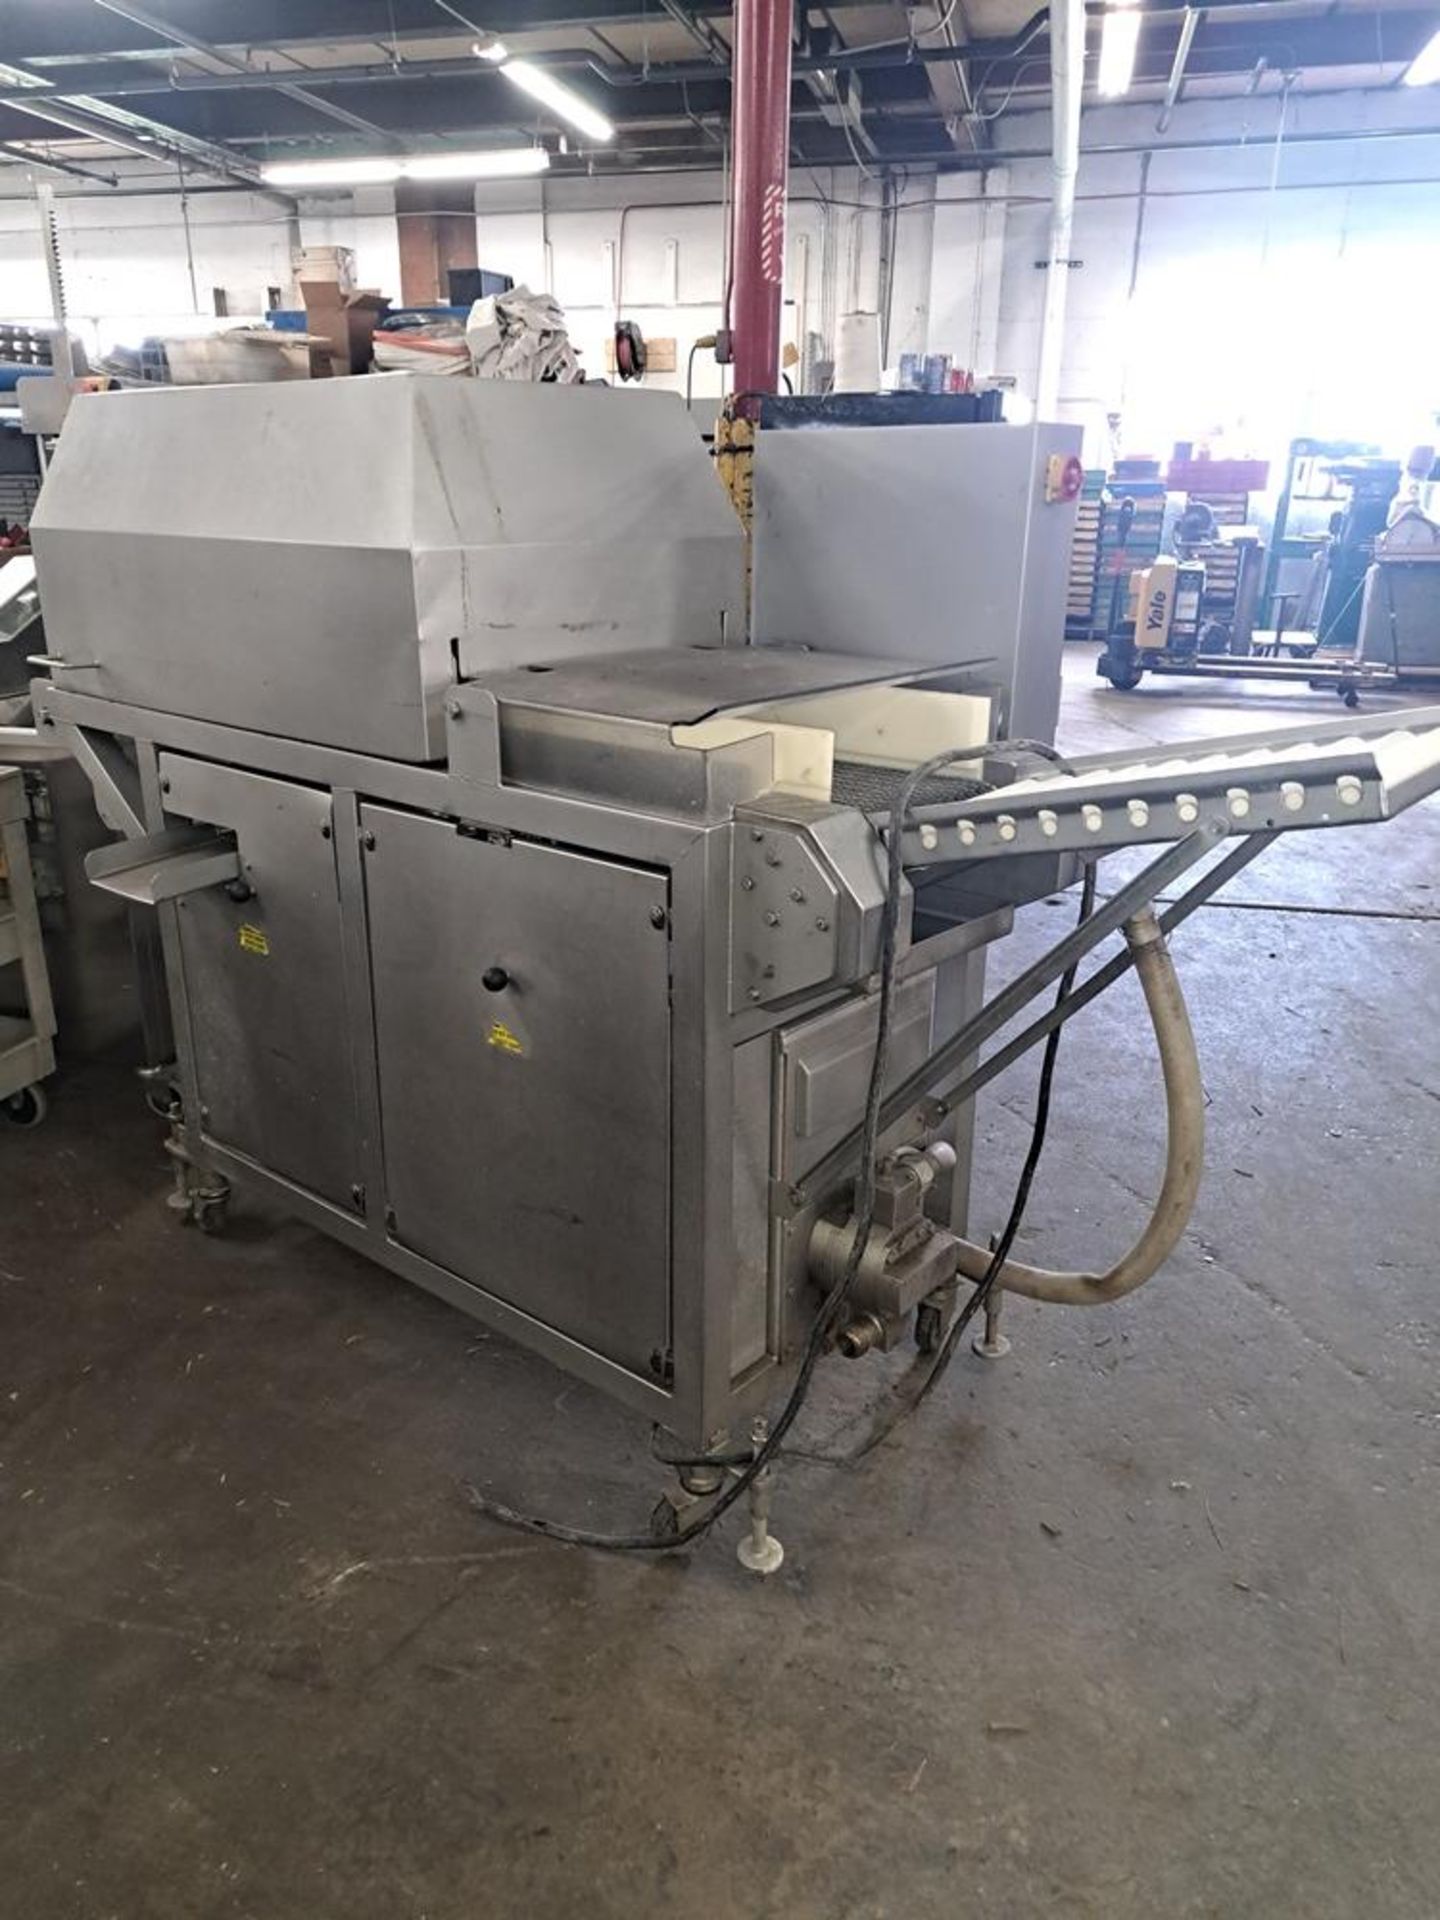 Townsend Mdl. 1450 Injector, Ser. #328, 13 1/2" wide X 6' long stainless steel conveyor, stainless